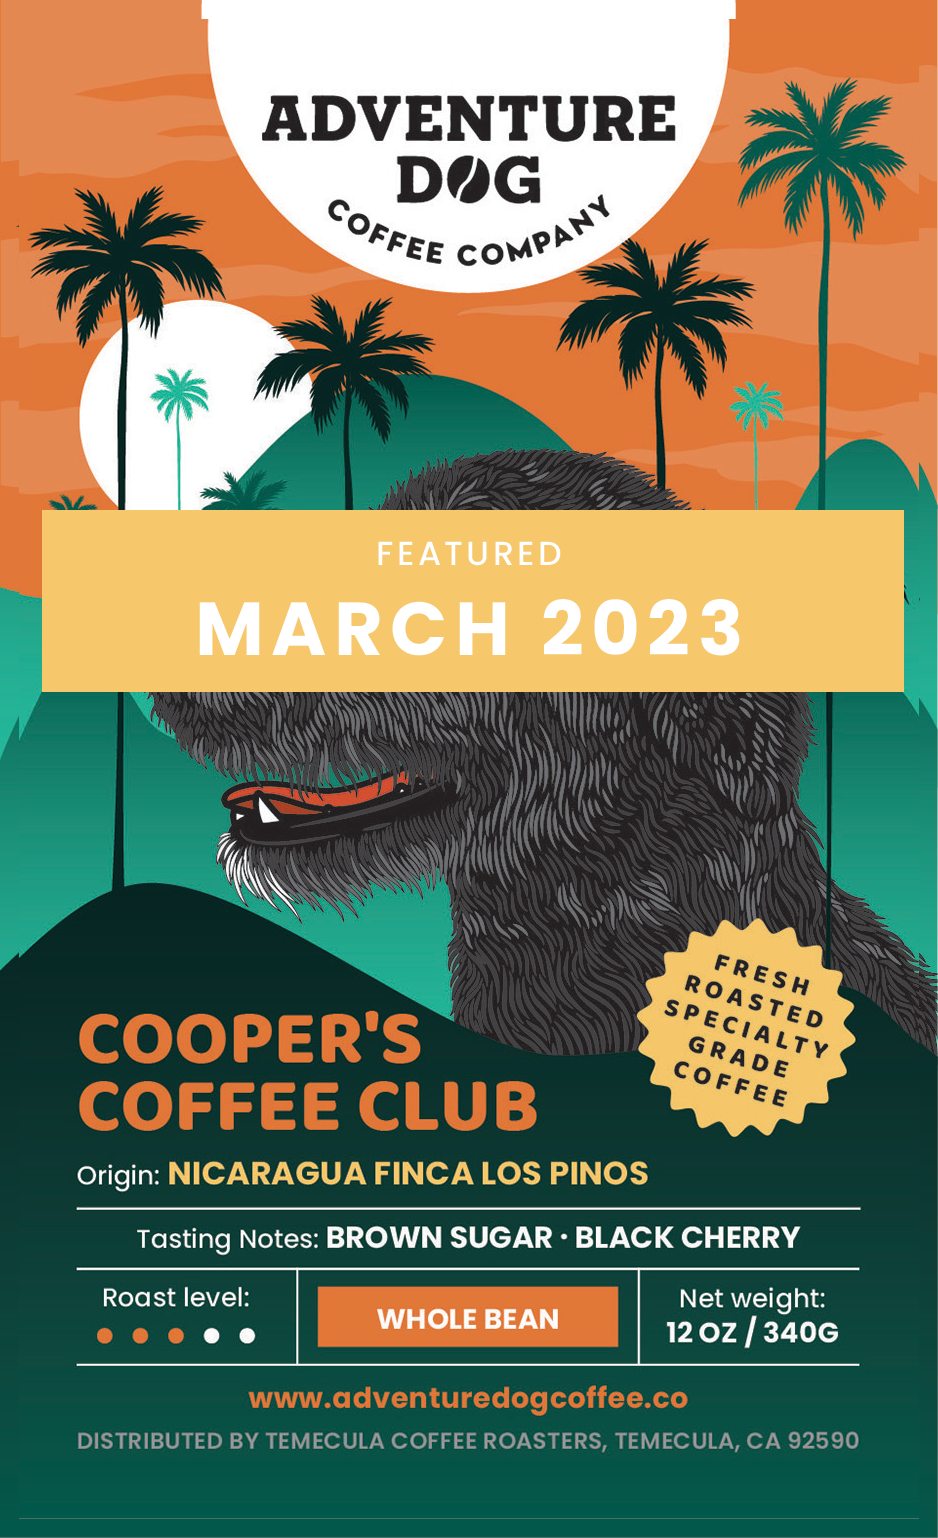 Nicaragua Nicaragua Finca Los Pinos: A bag of freshly roasted coffee beans with a label featuring an illustration of the terrier mix Cooper with a coffee farm in the background. This coffee is part of the Cooper's Coffee Club subscription service offered by Adventure Dog Coffee Co.Finca Los Pinos: A bag of freshly roasted coffee beans with a label featuring a scenic image of a coffee farm in Nicaragua. This coffee is part of the Cooper's Coffee Club subscription service offered by Adventure Dog Coffee Co.